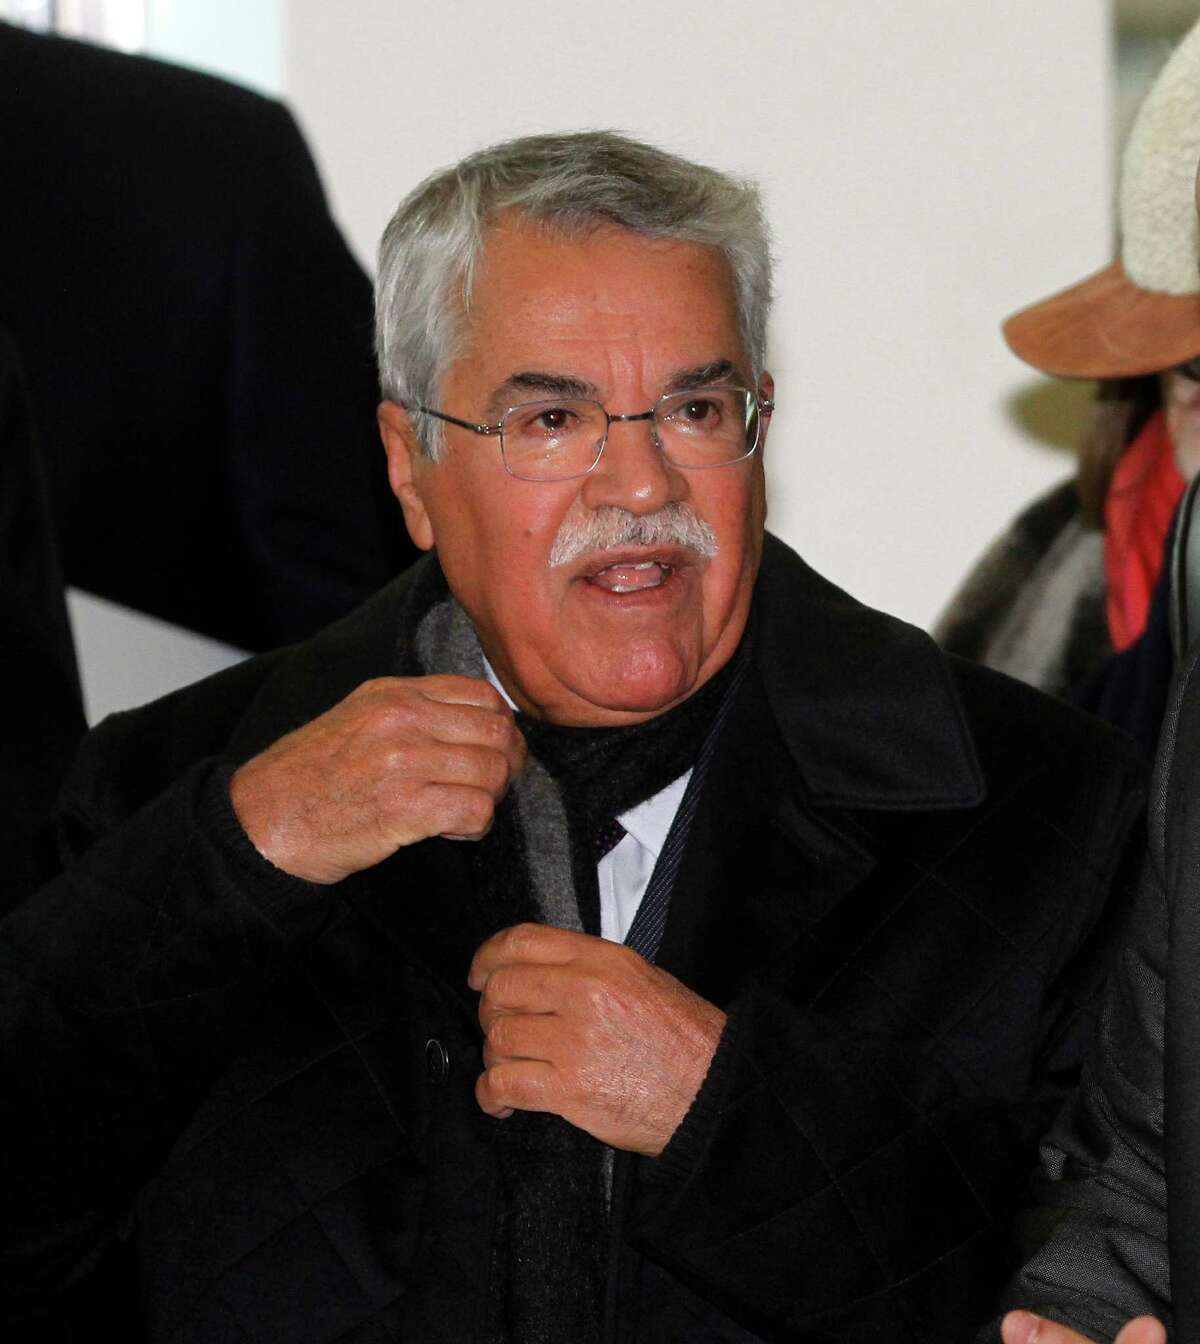 Saudi Arabia's Minister of Petroleum and Mineral Resources Ali Ibrahim Naimi arrives for a meeting of the Organization of the Petroleum Exporting Countries, OPEC, at their headquarters in Vienna, Austria, Wednesday, Dec. 12, 2012 (AP Photo/Ronald Zak)